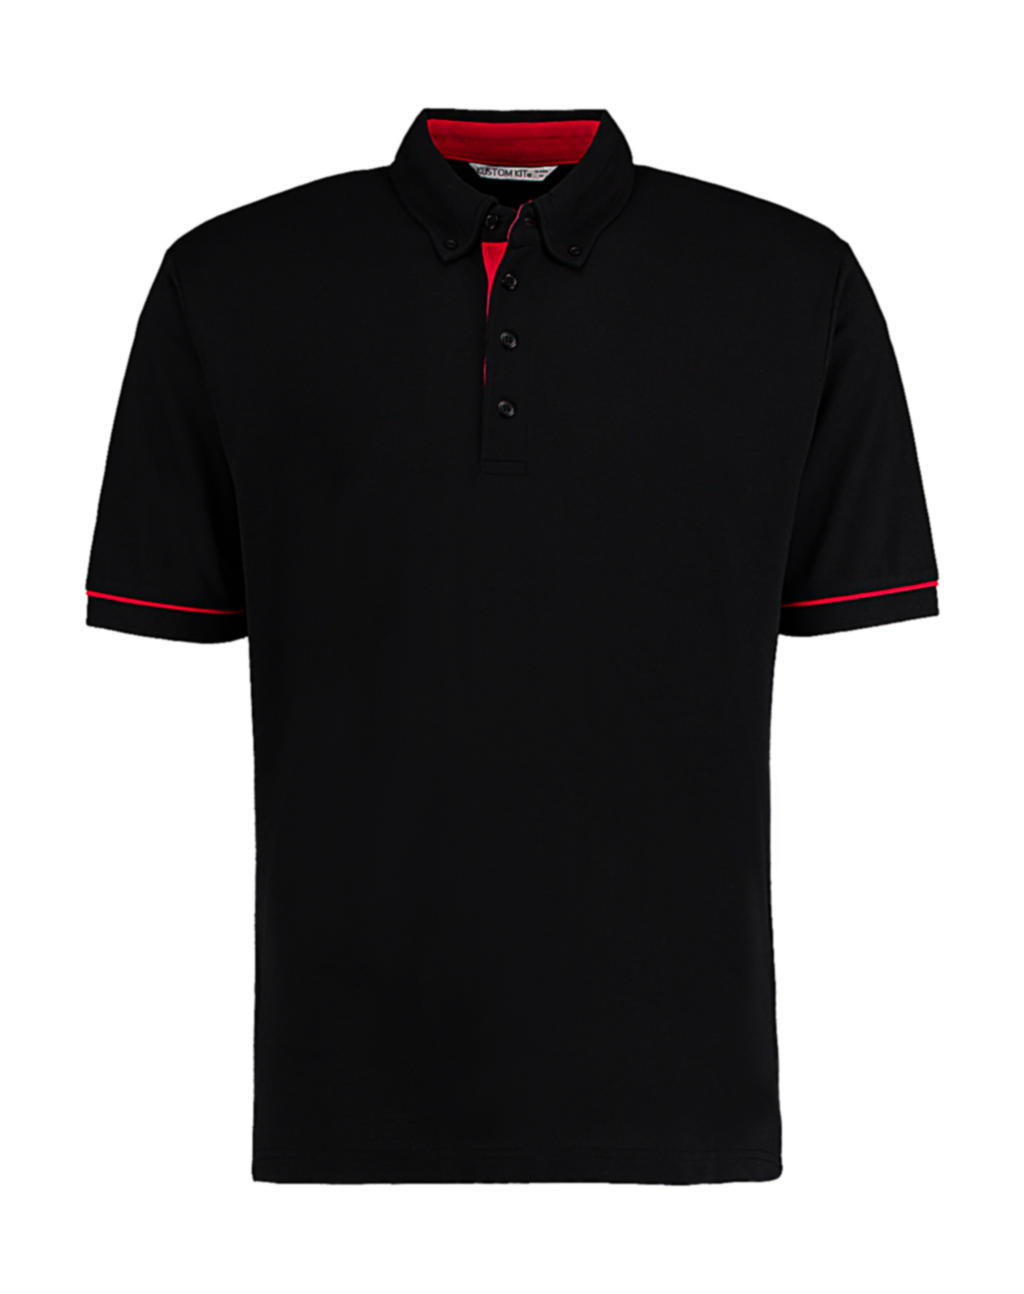  Classic Fit Button Down Contrast Polo Shirt in Farbe Black/Red